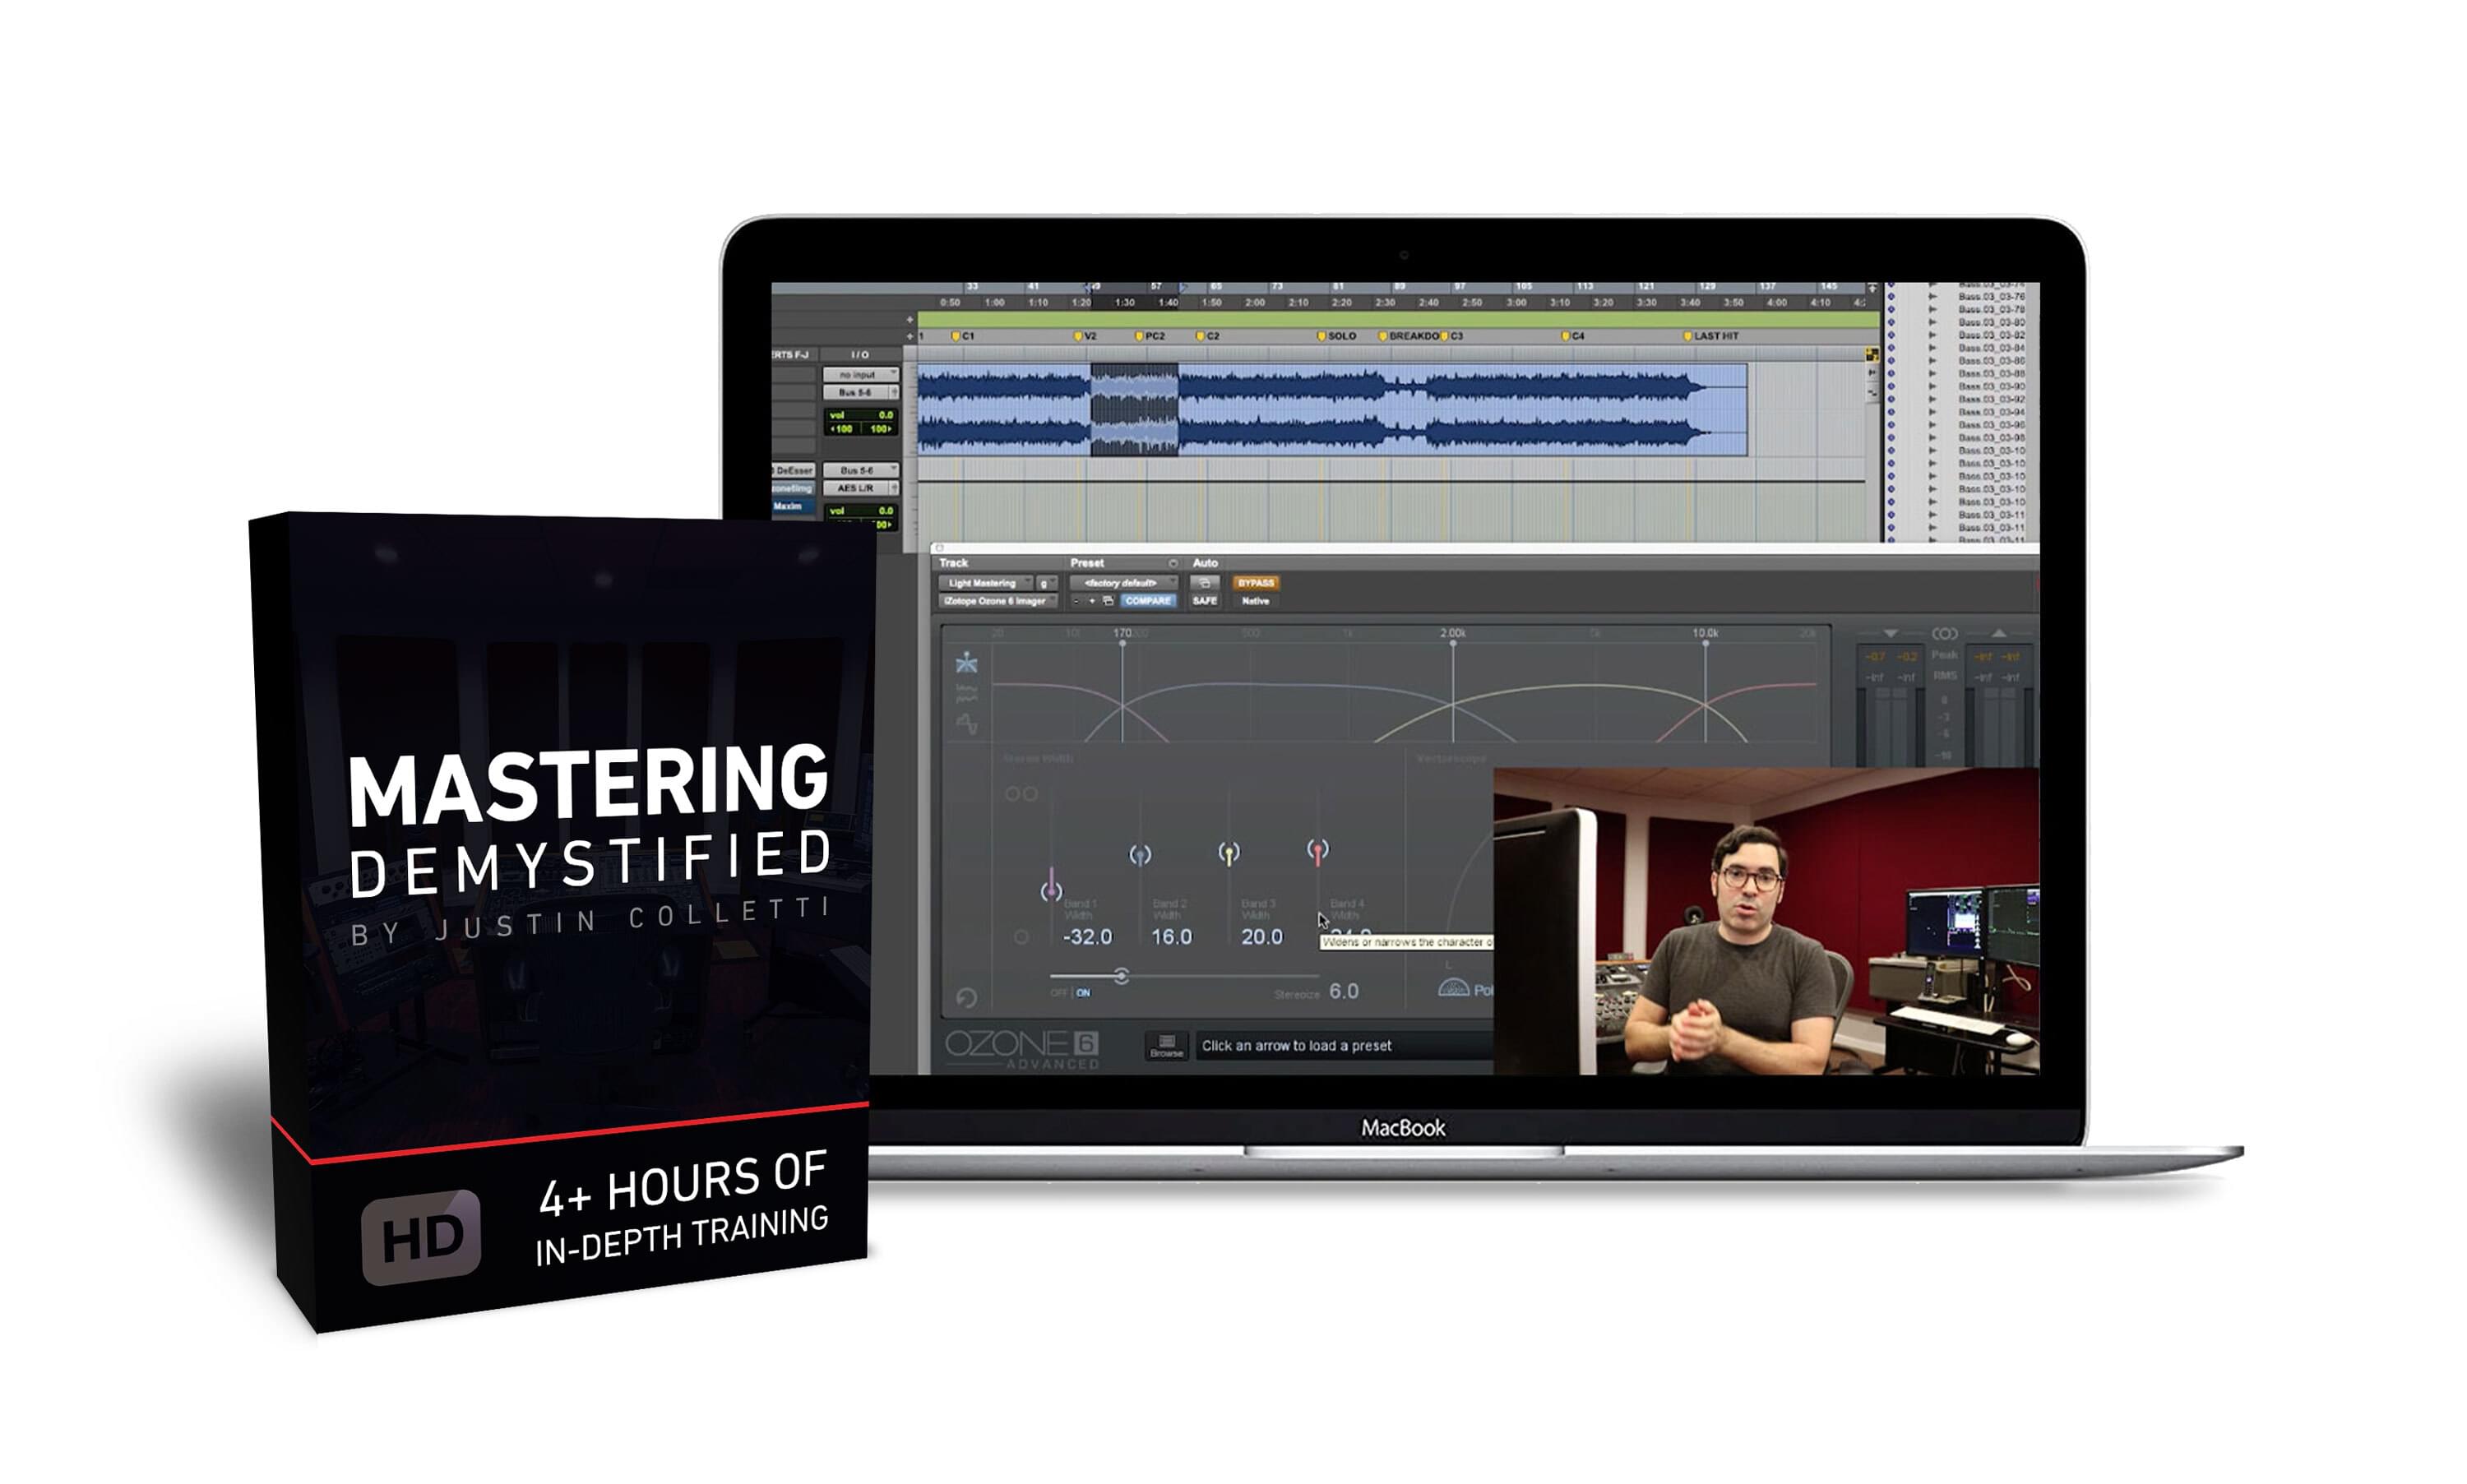 Mastering Demystified product box and screenshot